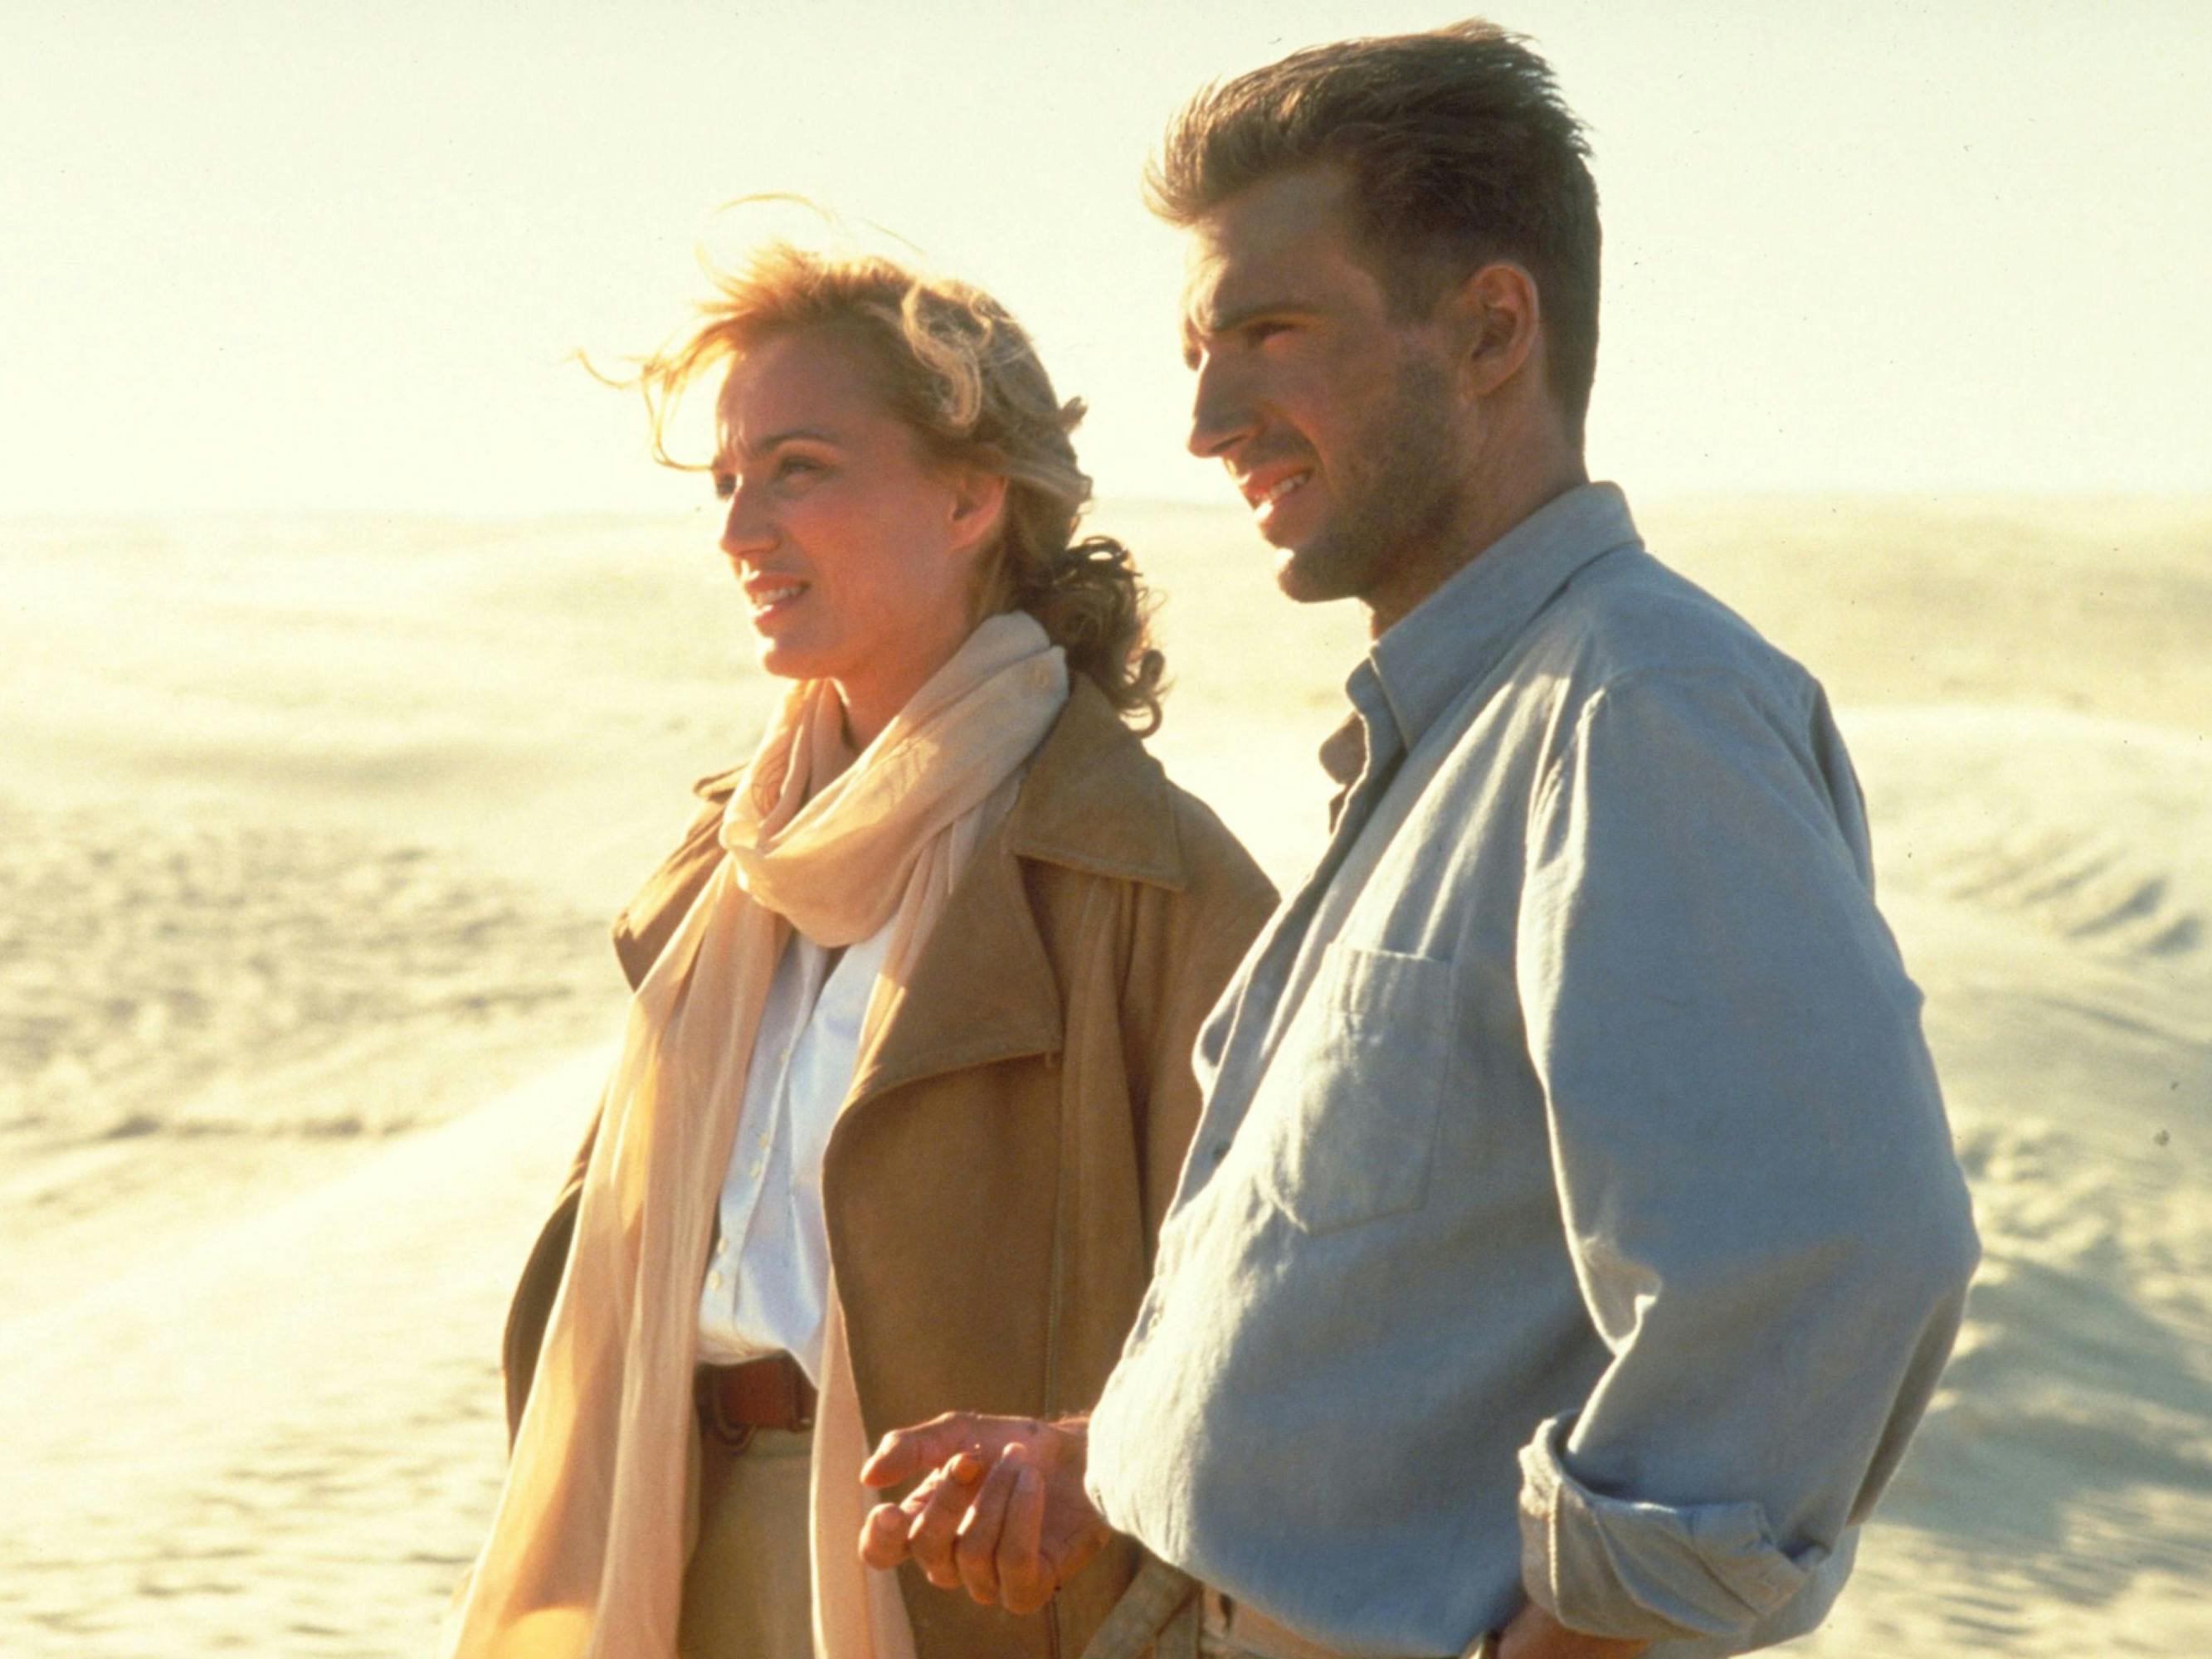 Kristin Scott Thomas and Ralph Fiennes stand together in a scene from The English Patient. Scott Thomas has a billowy tan scarf hung loosely around her neck. They smile, lit by the sun.